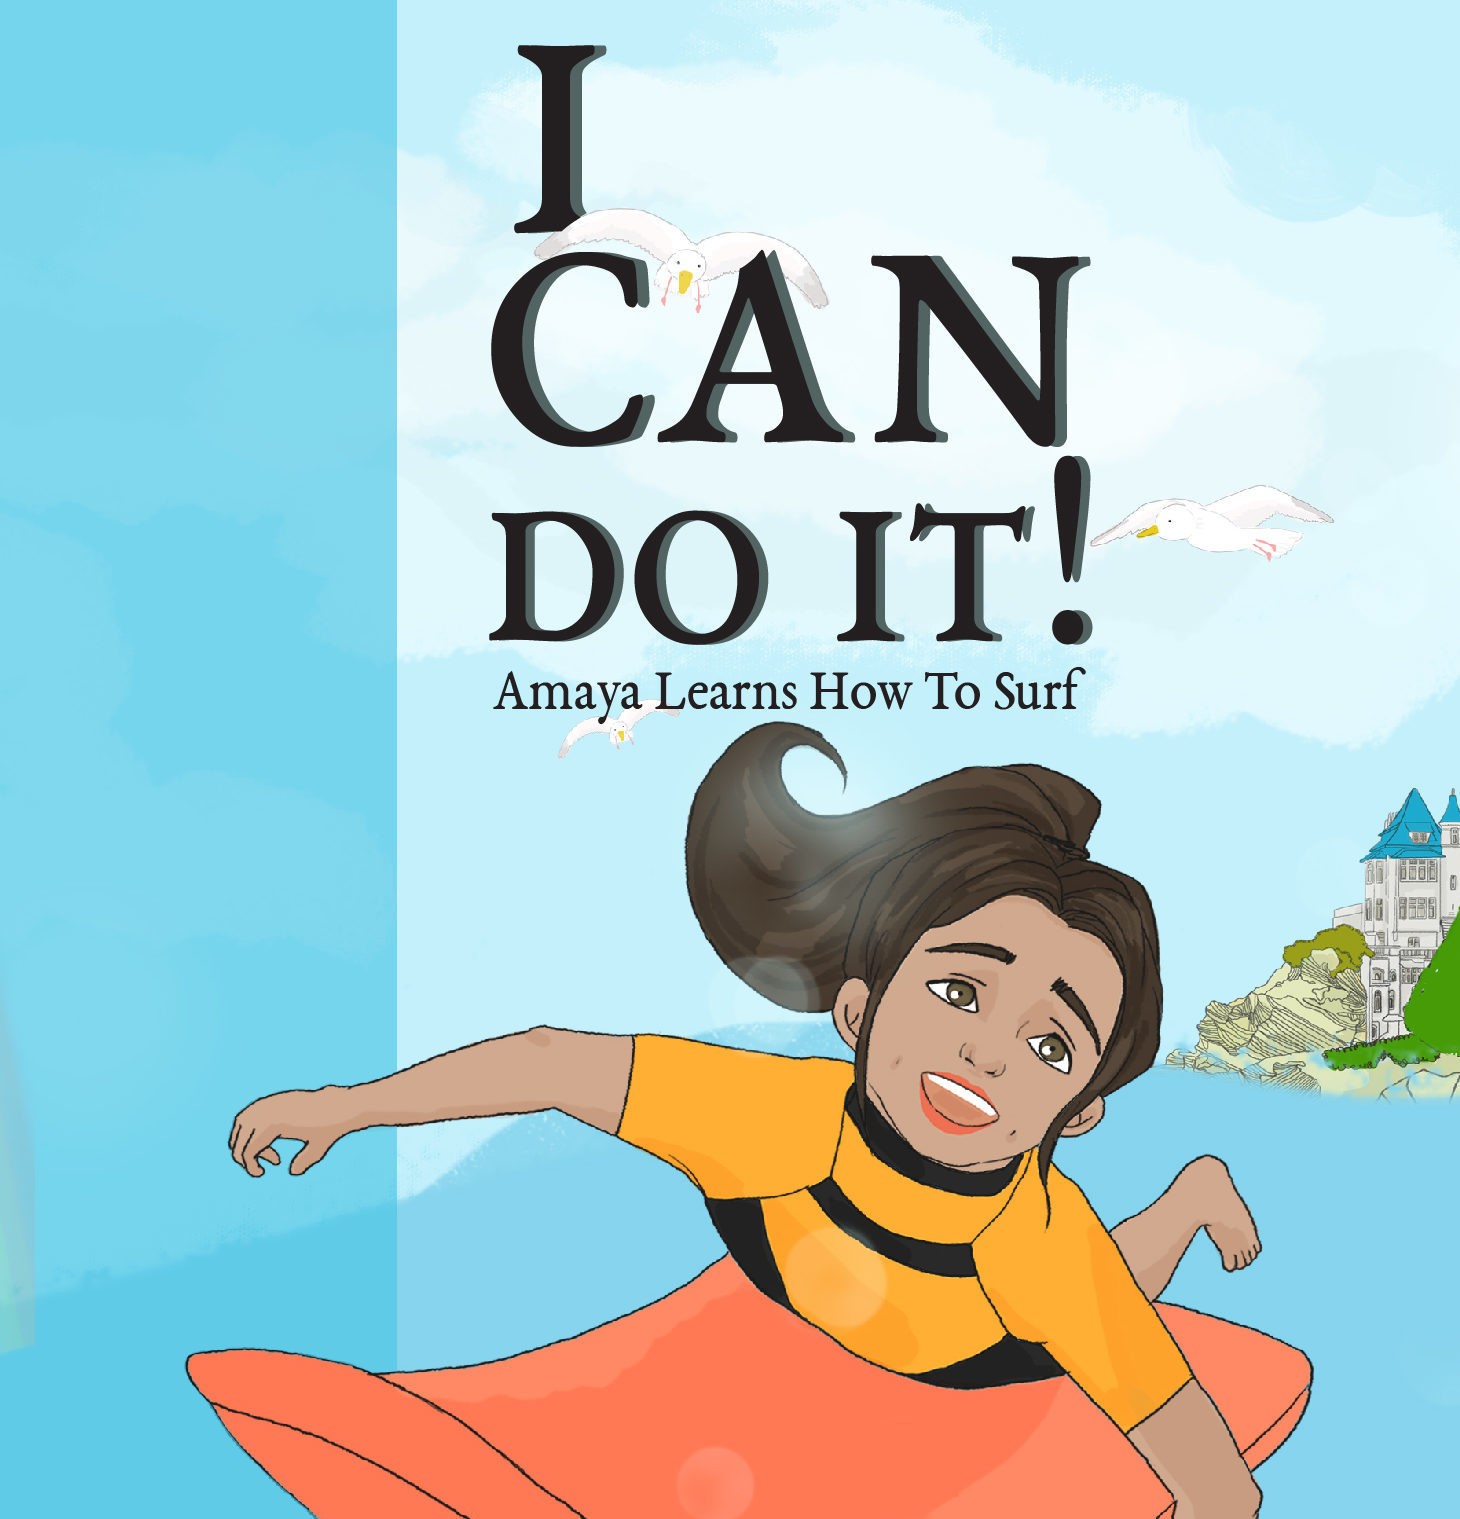 I CAN DO IT! – Amaya learns how to surf